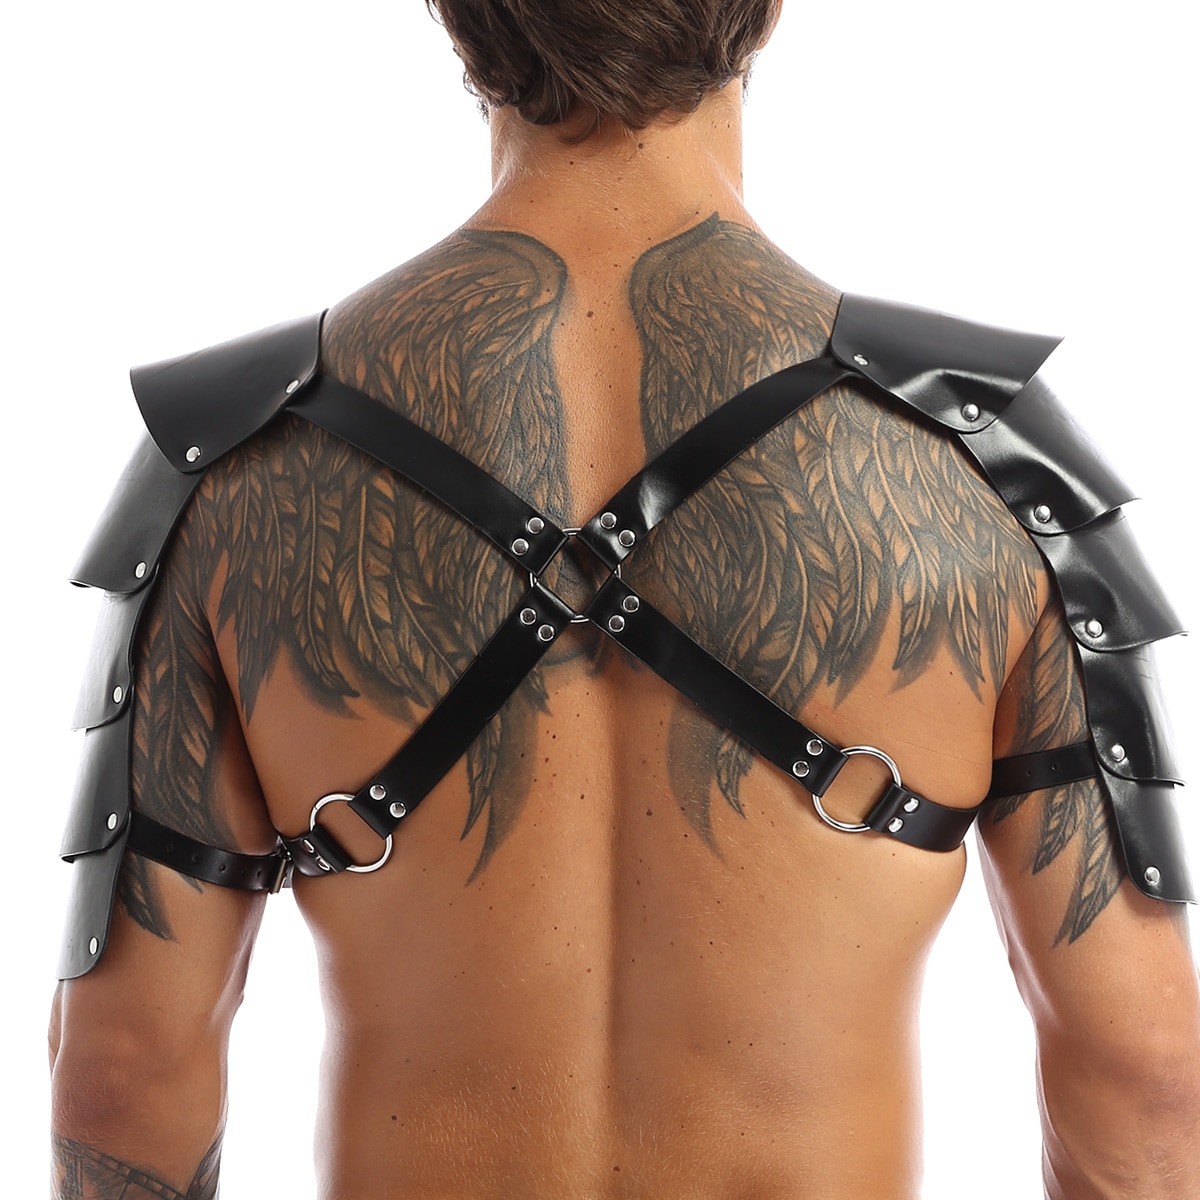 Faux Leather Body Harness with Adjustable Straps, 1,000+ Men's Lingerie